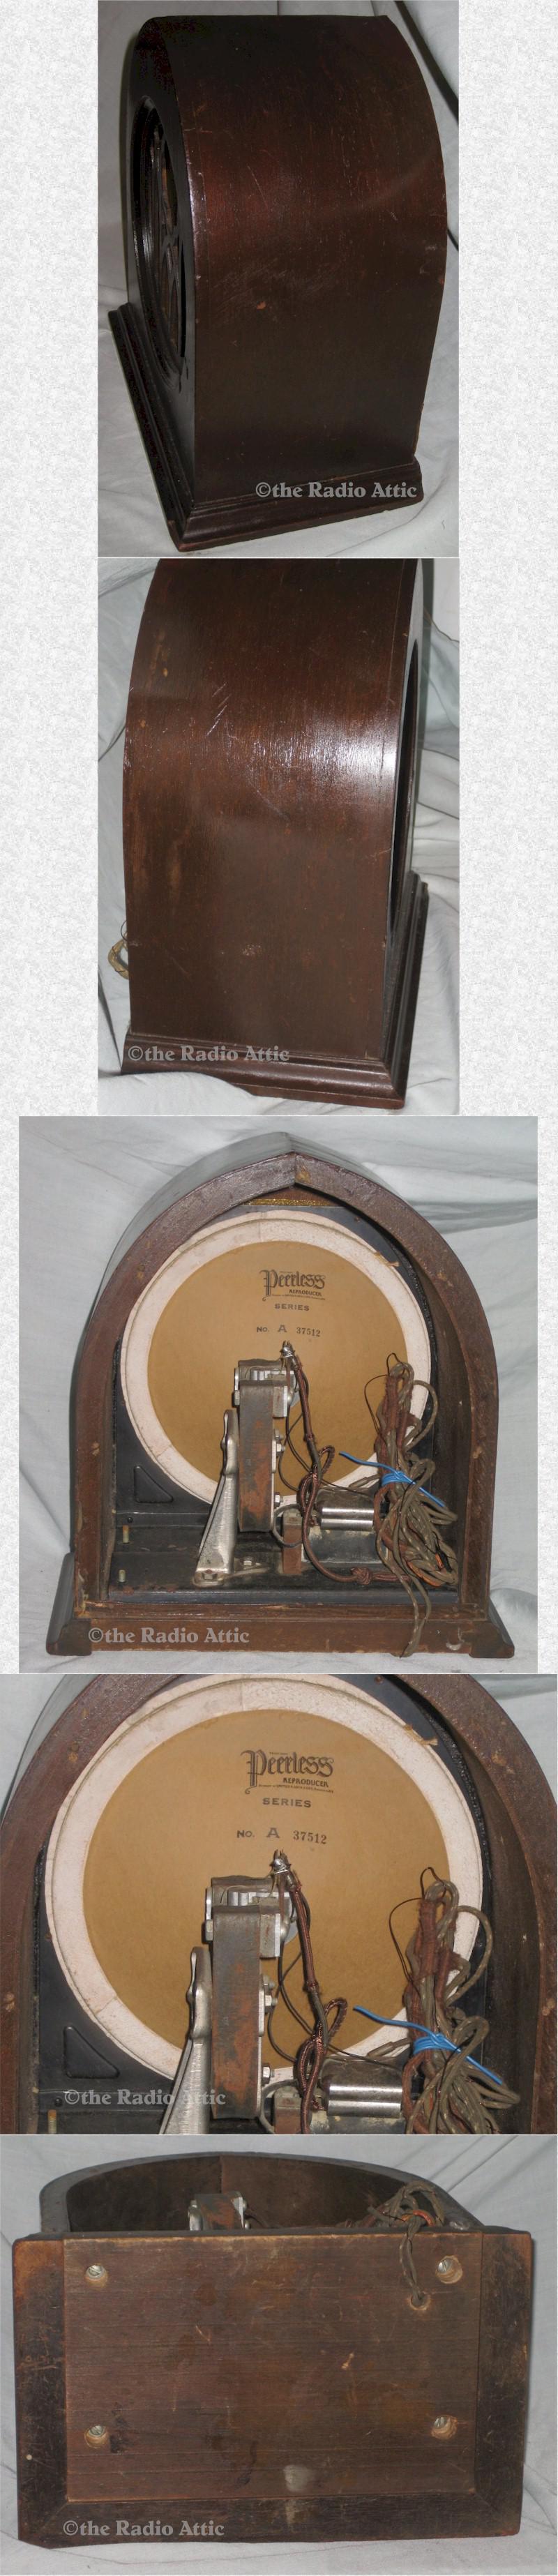 Peerless Series "A" Reproducer (1928 or 29)